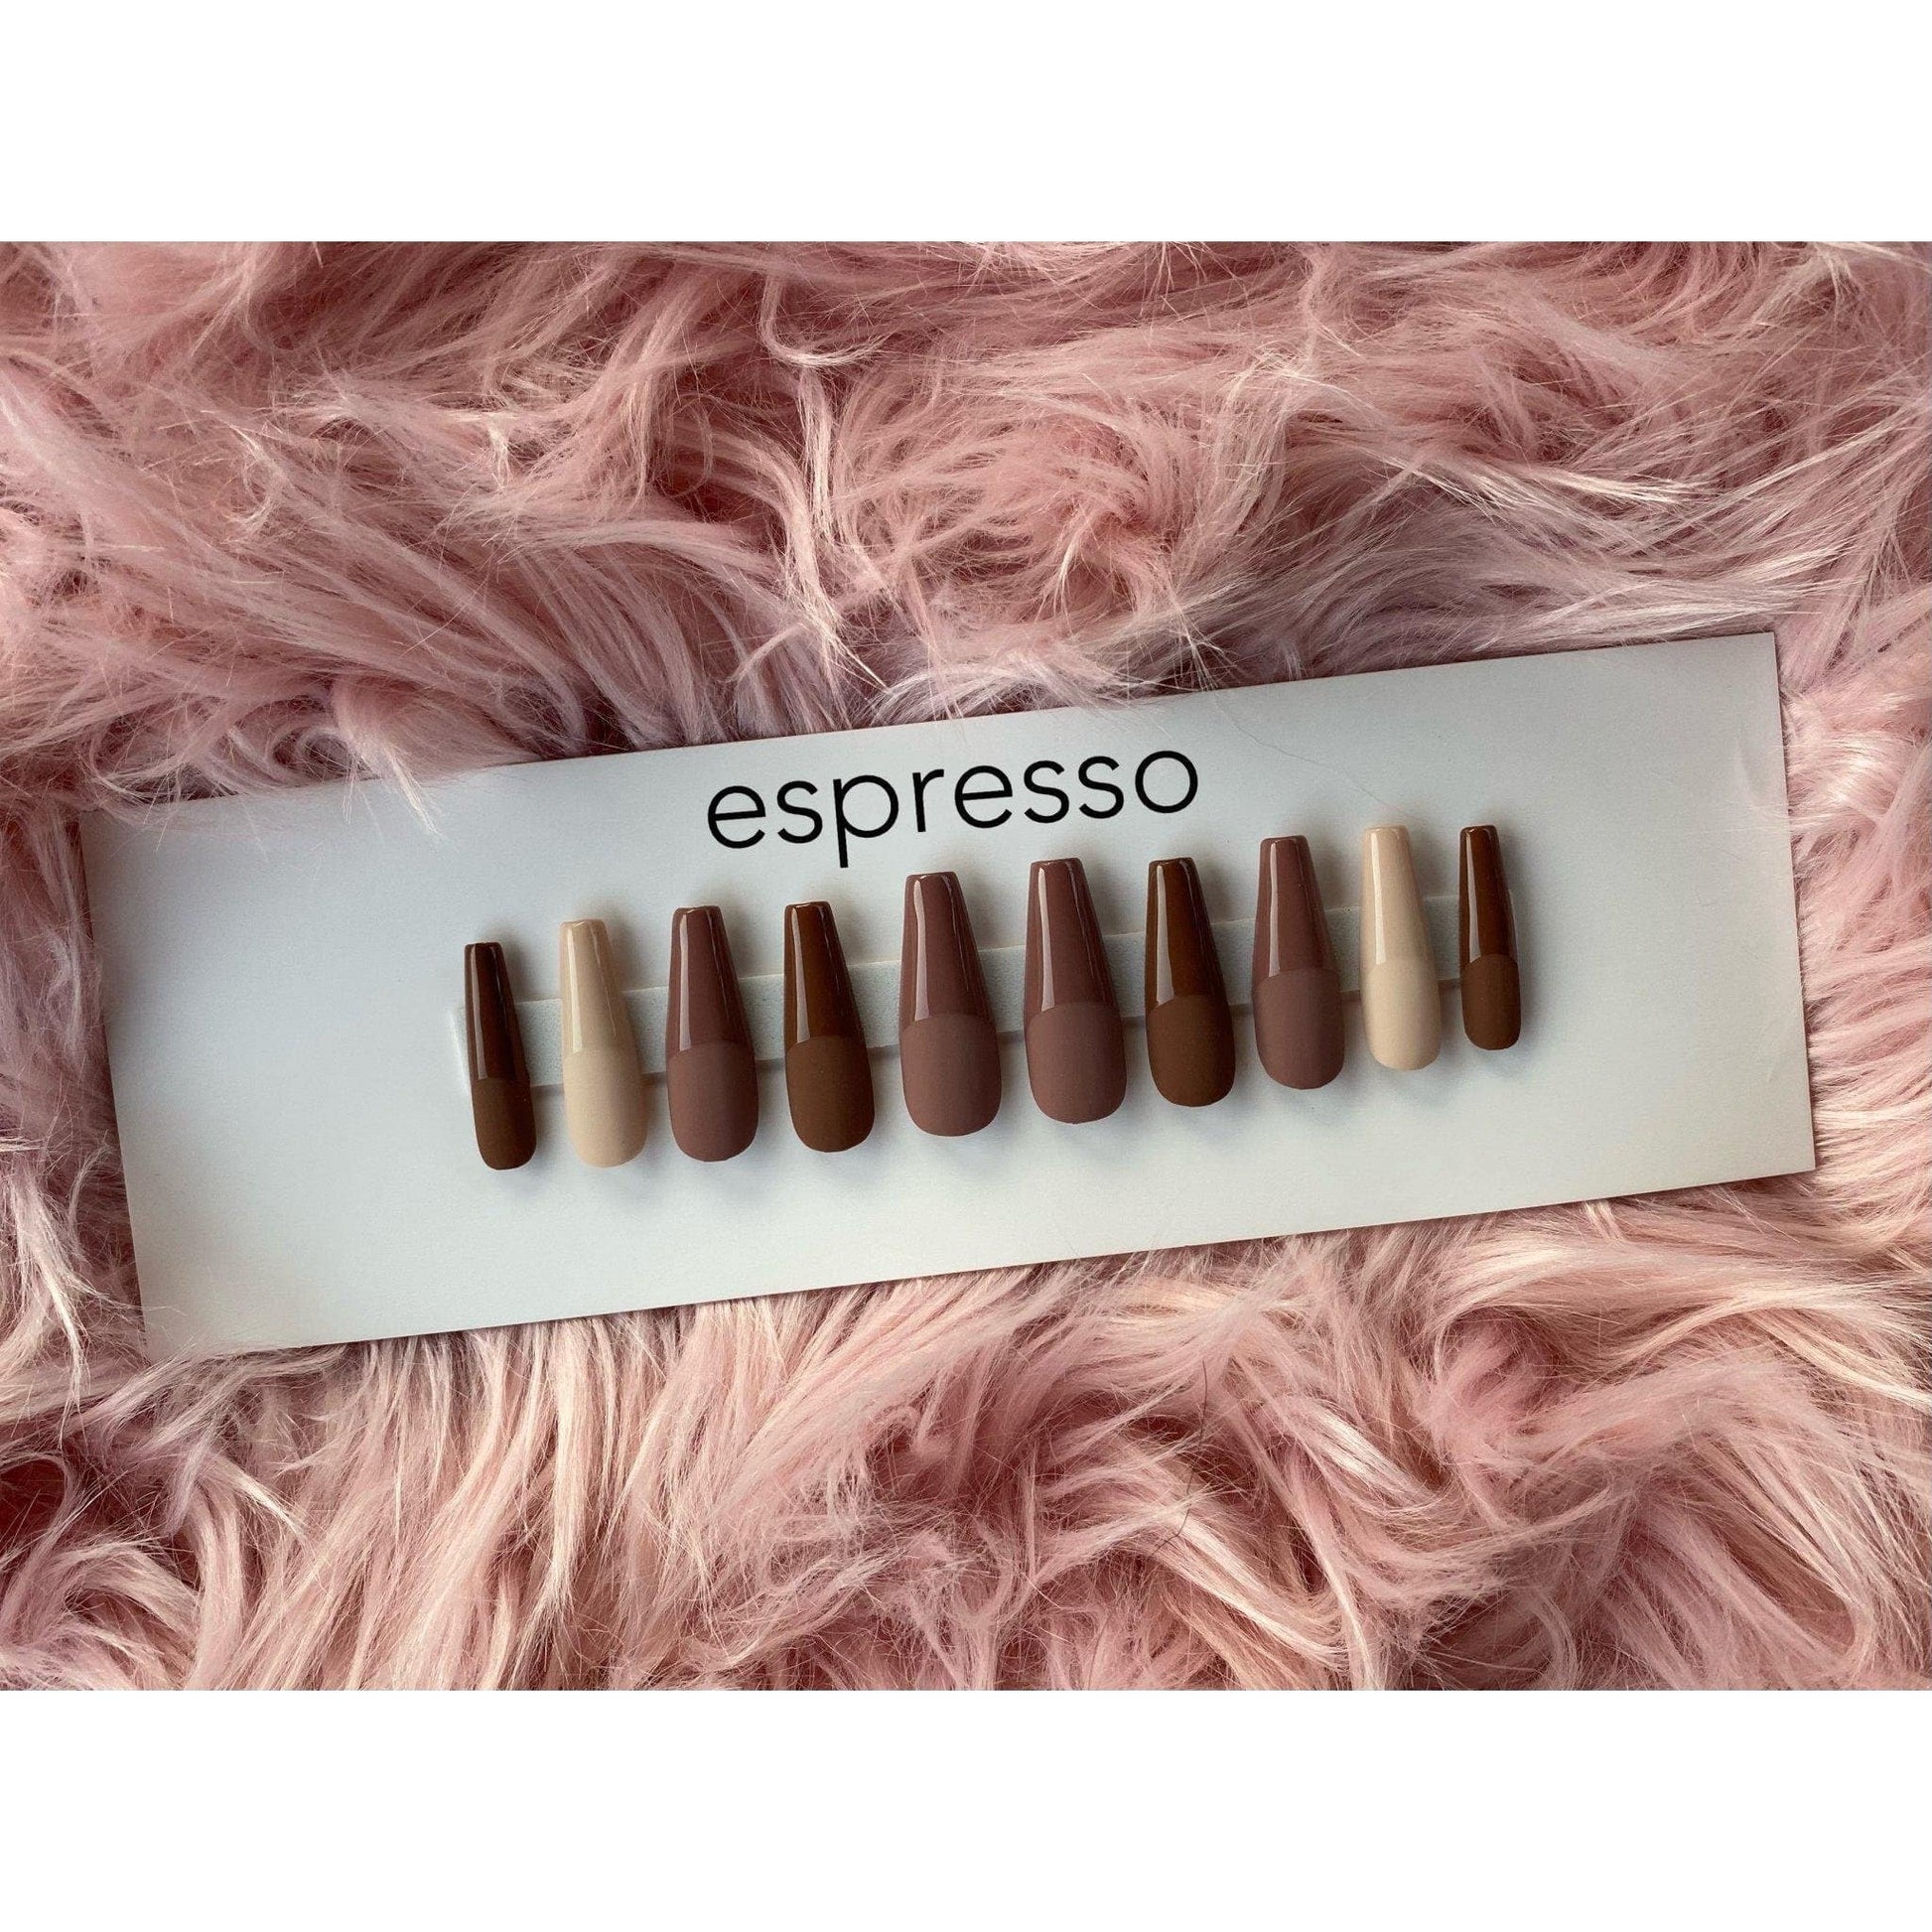 ESPRESSO - LUXE NAILS - FEMME by Alonna Elaine